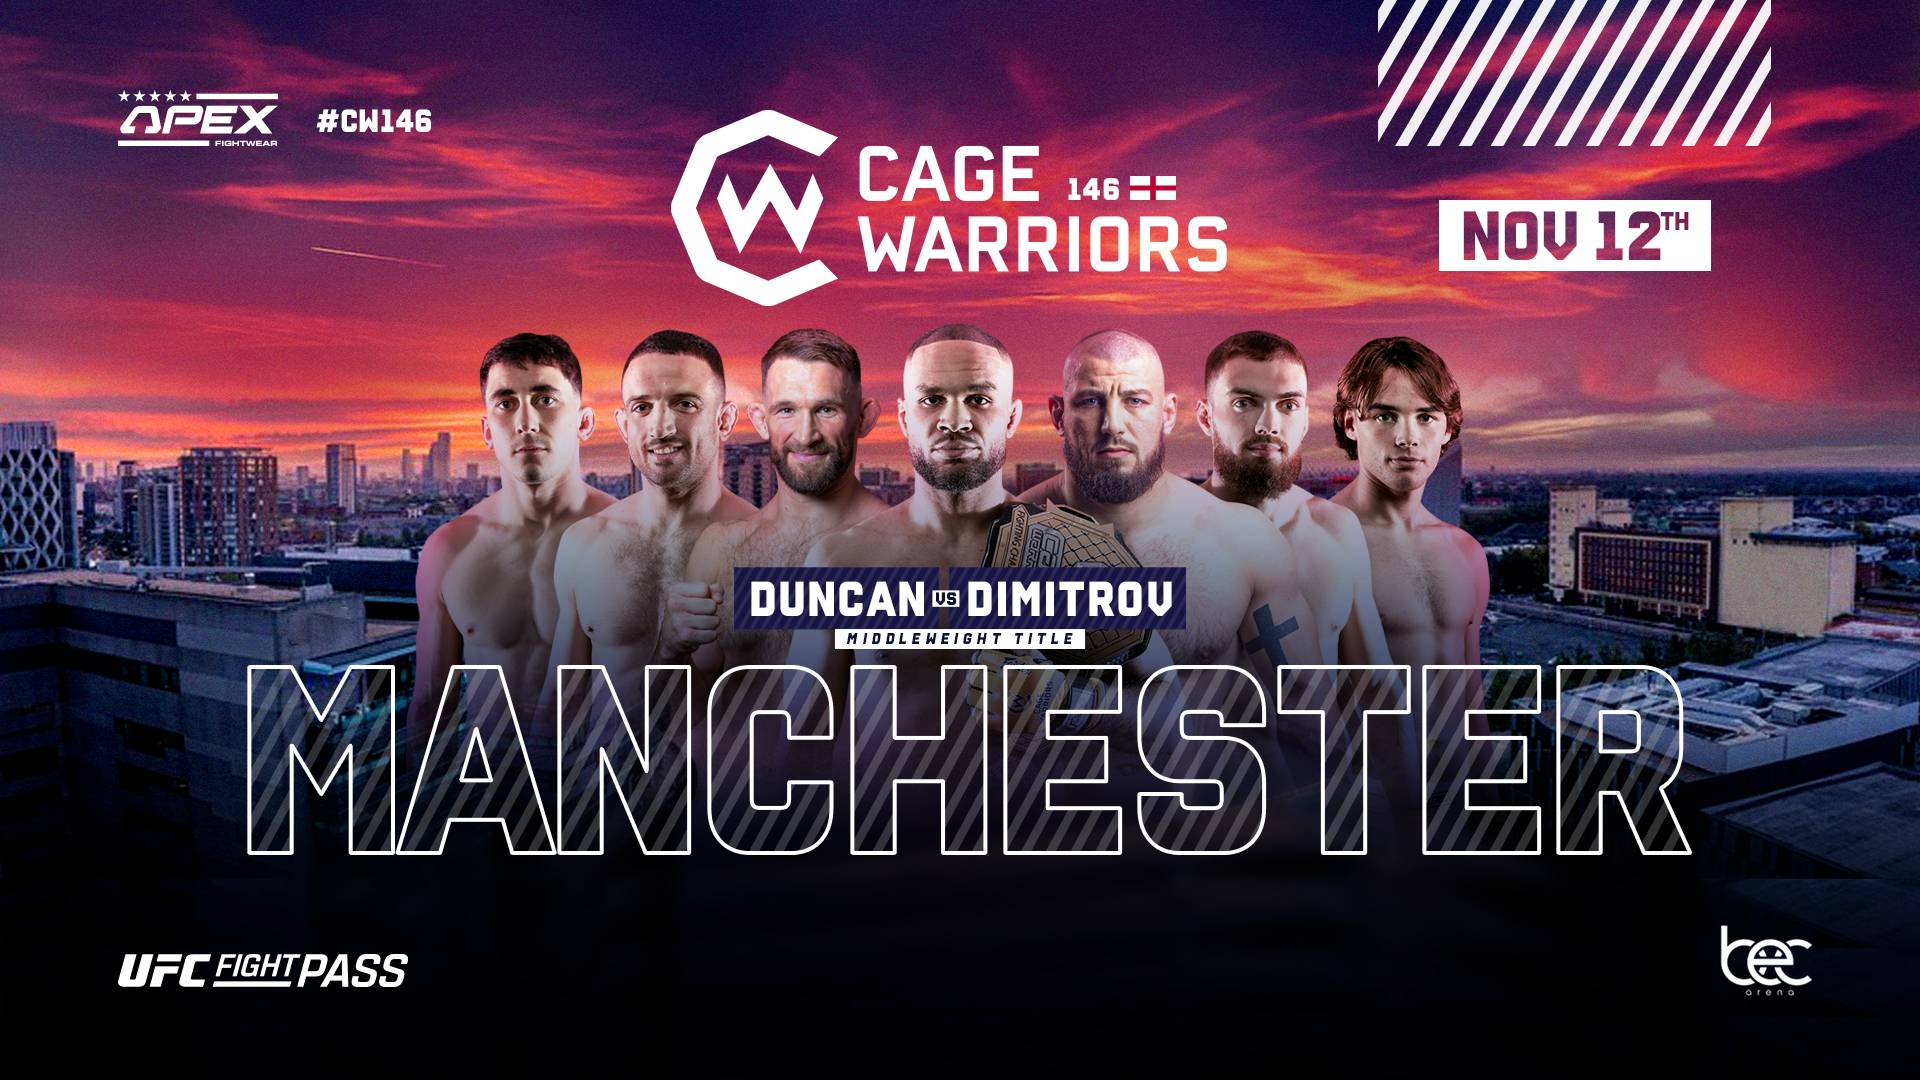 Cage Warriors 146 Poster